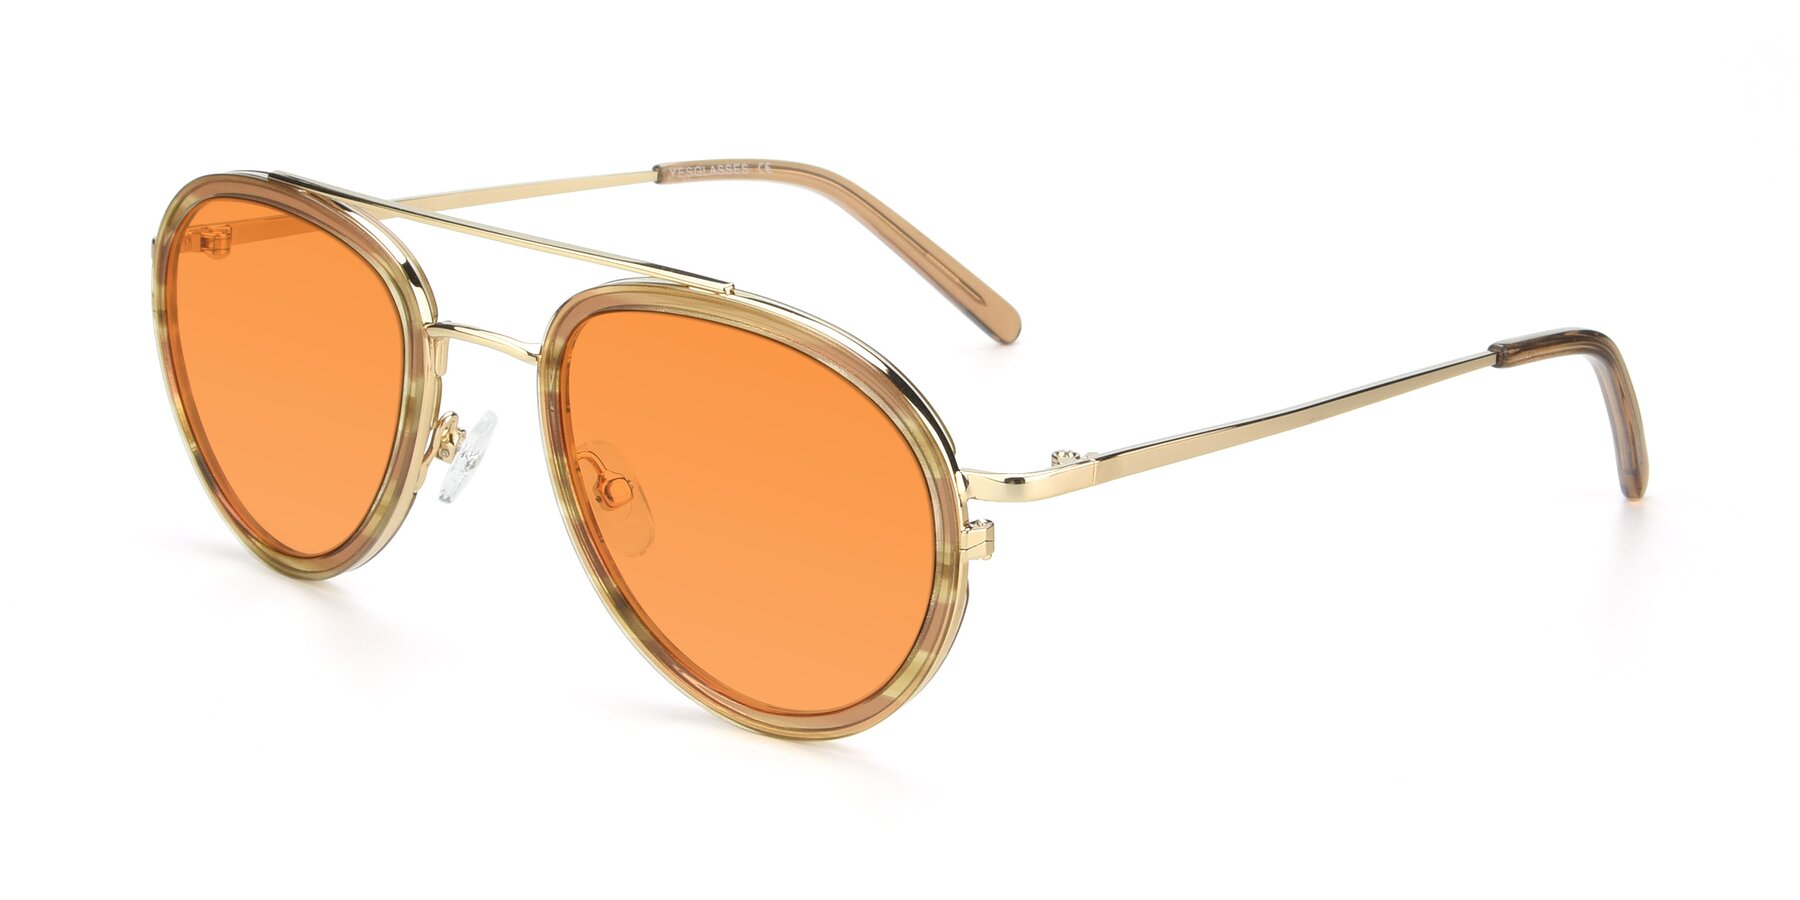 Angle of 9554 in Gold-Caramel with Orange Tinted Lenses